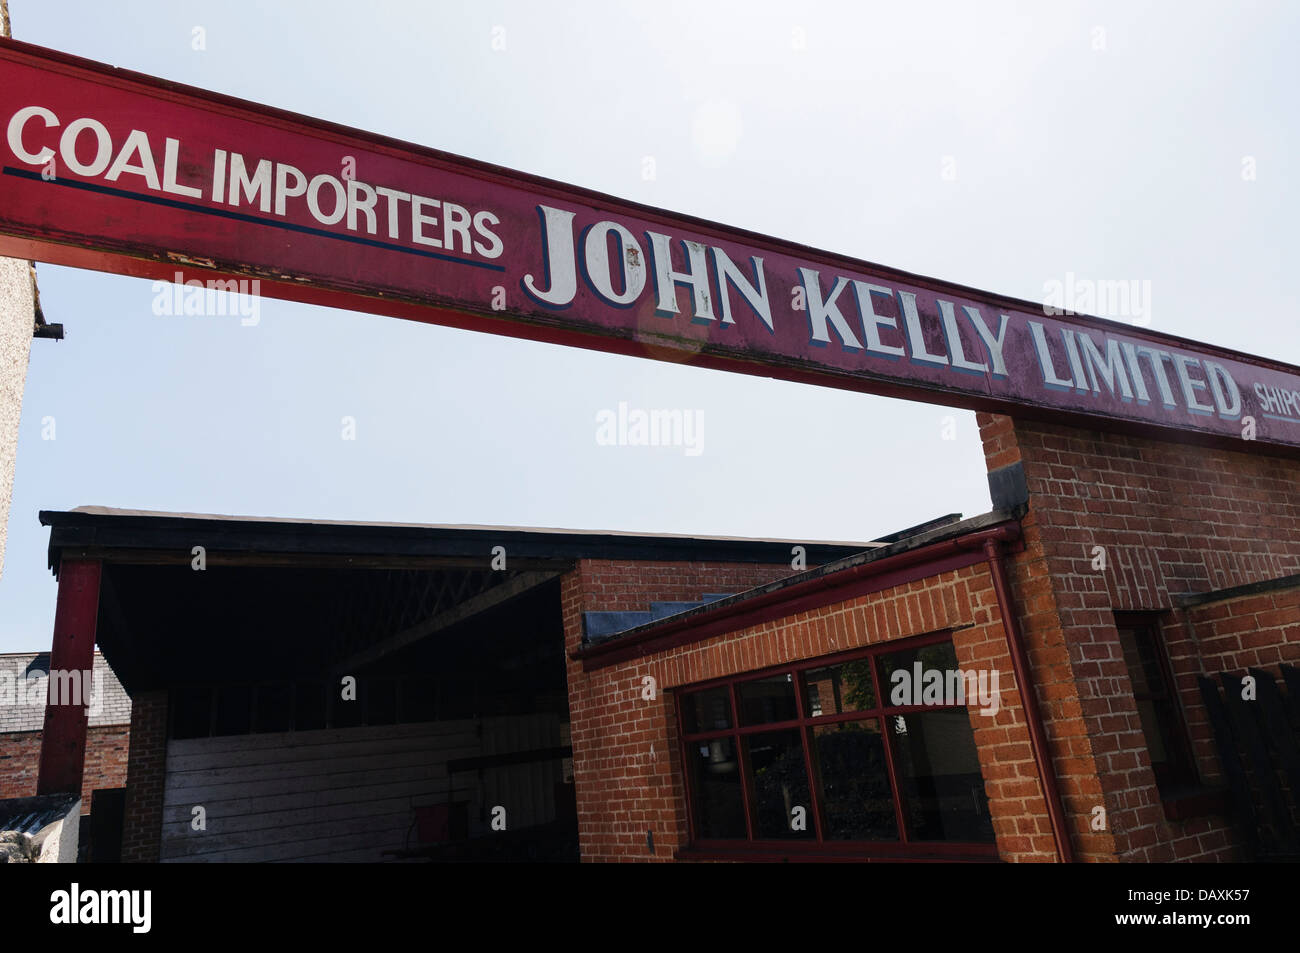 Sign for John Kelly Limited, coal importer established in the 19th Century in Ireland Stock Photo